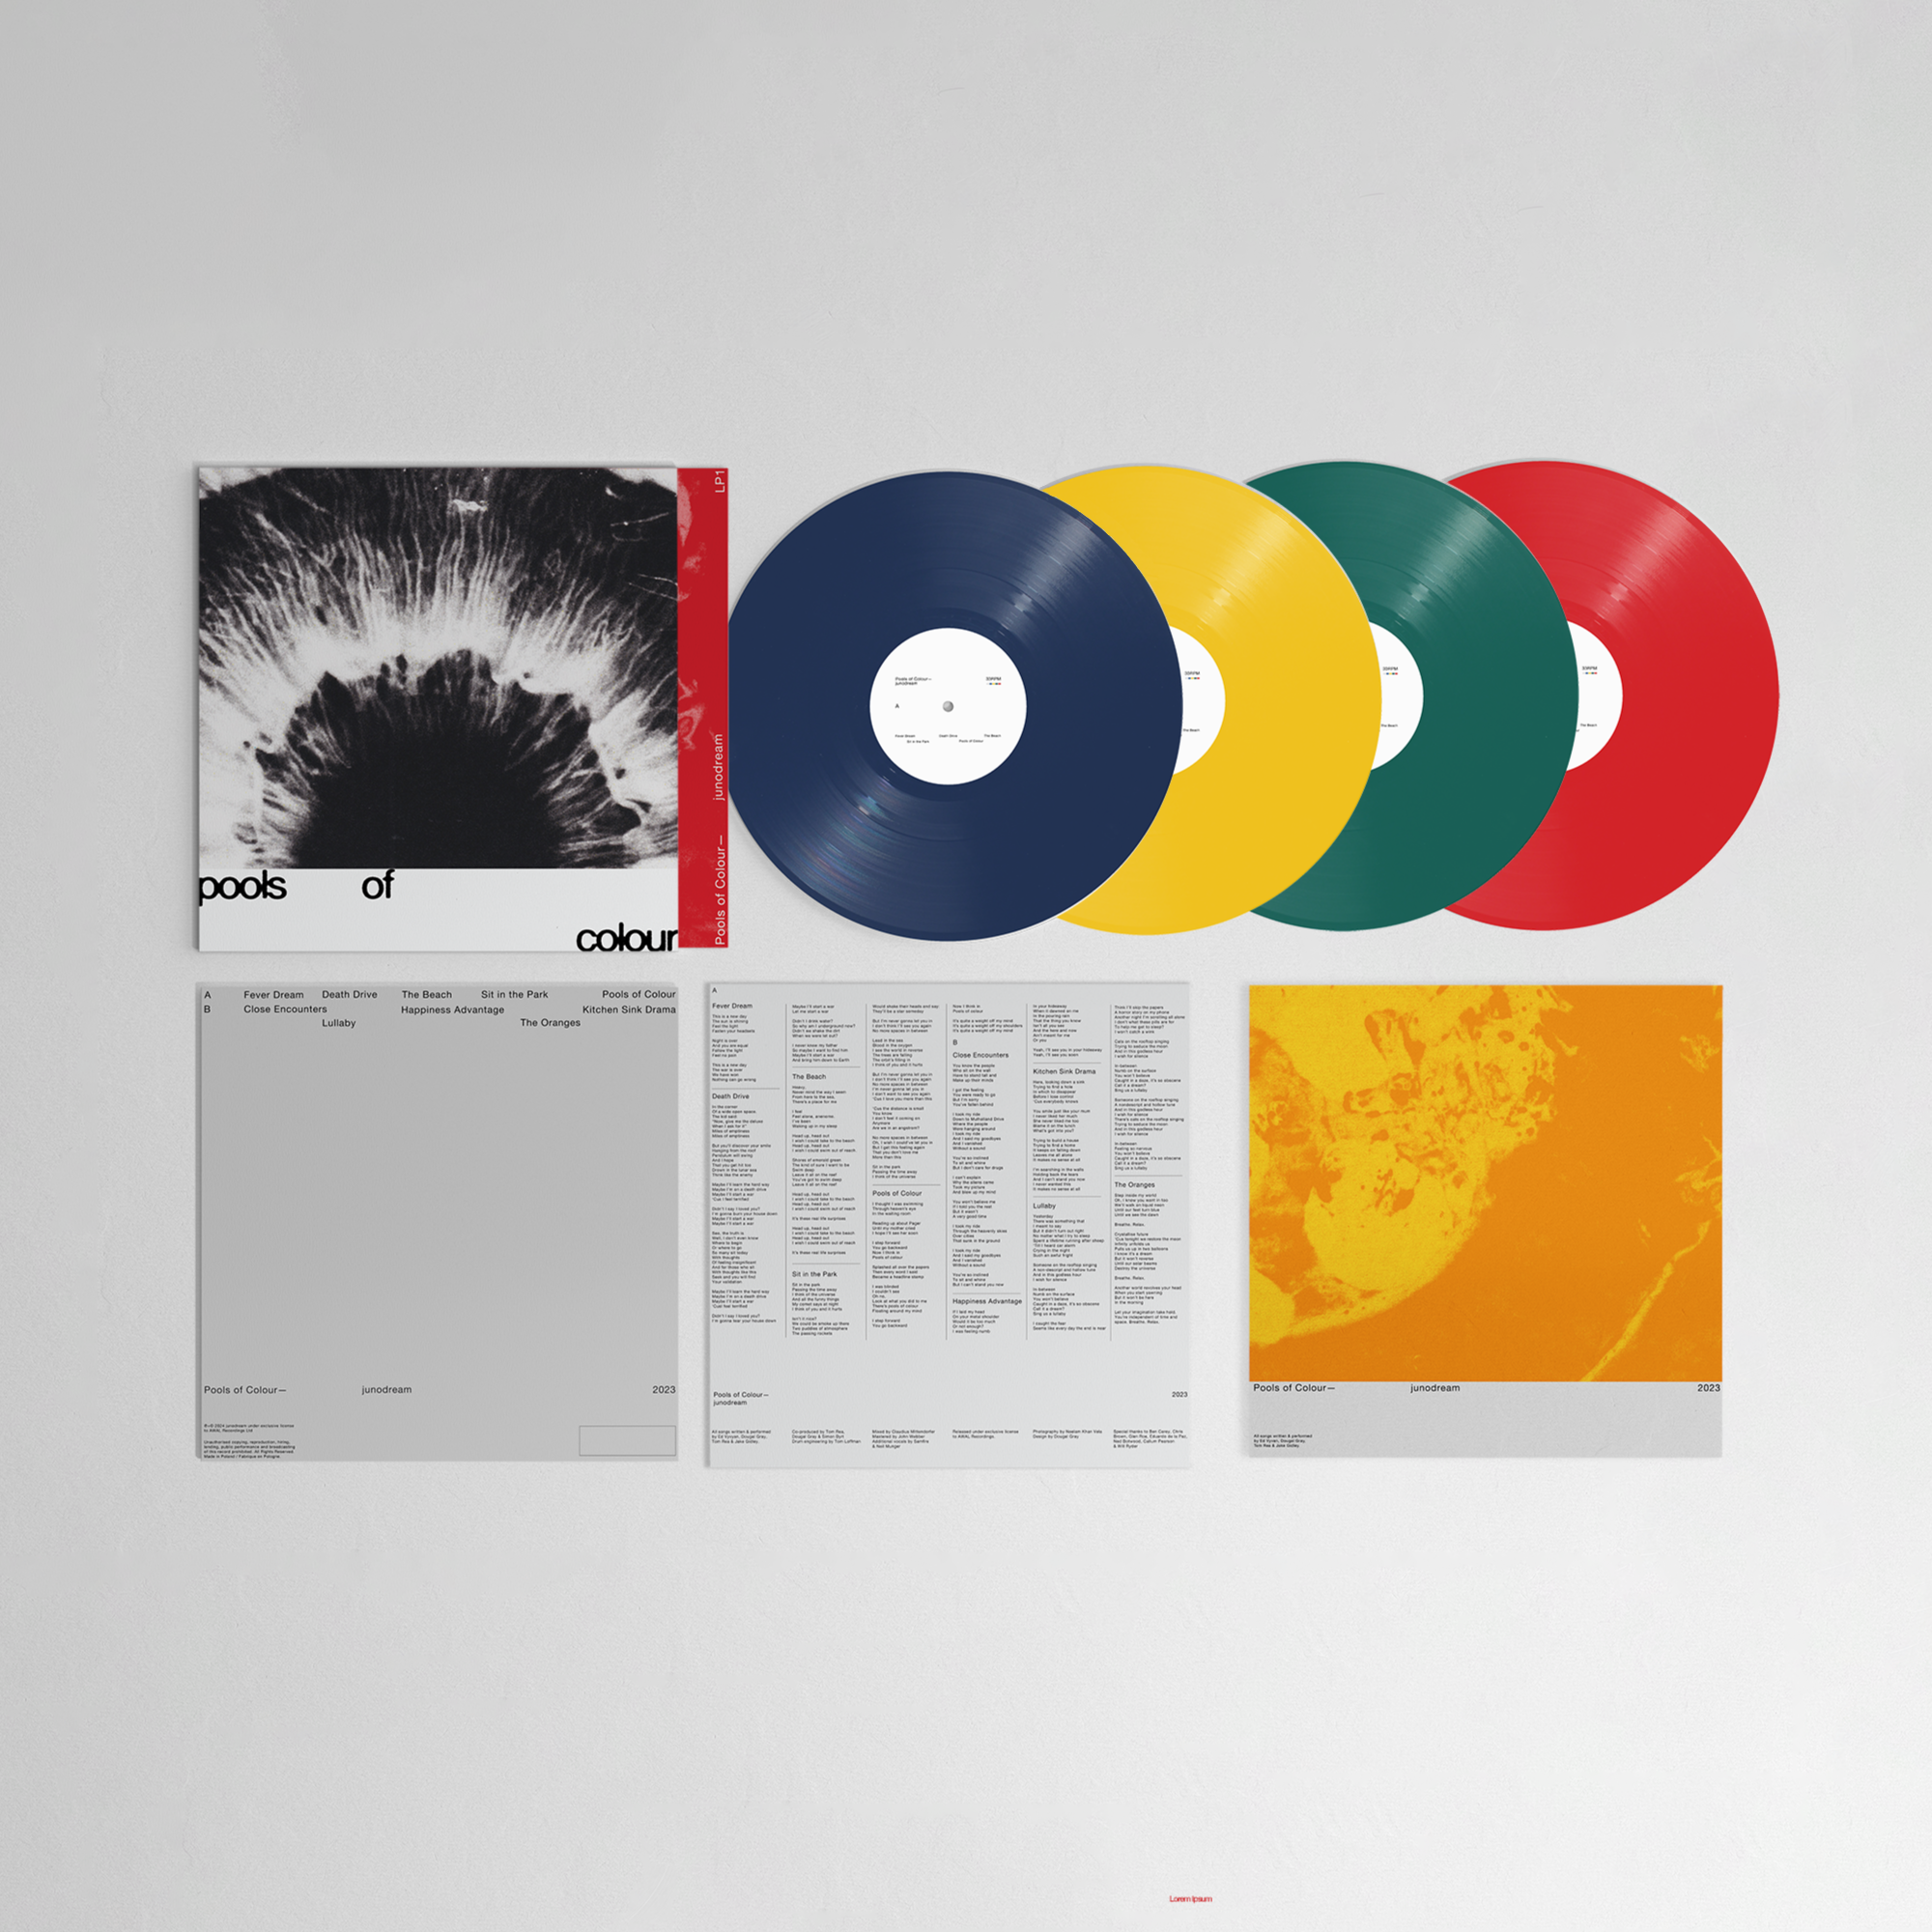 junodream - Pools of Colour (Limited Edition LP)